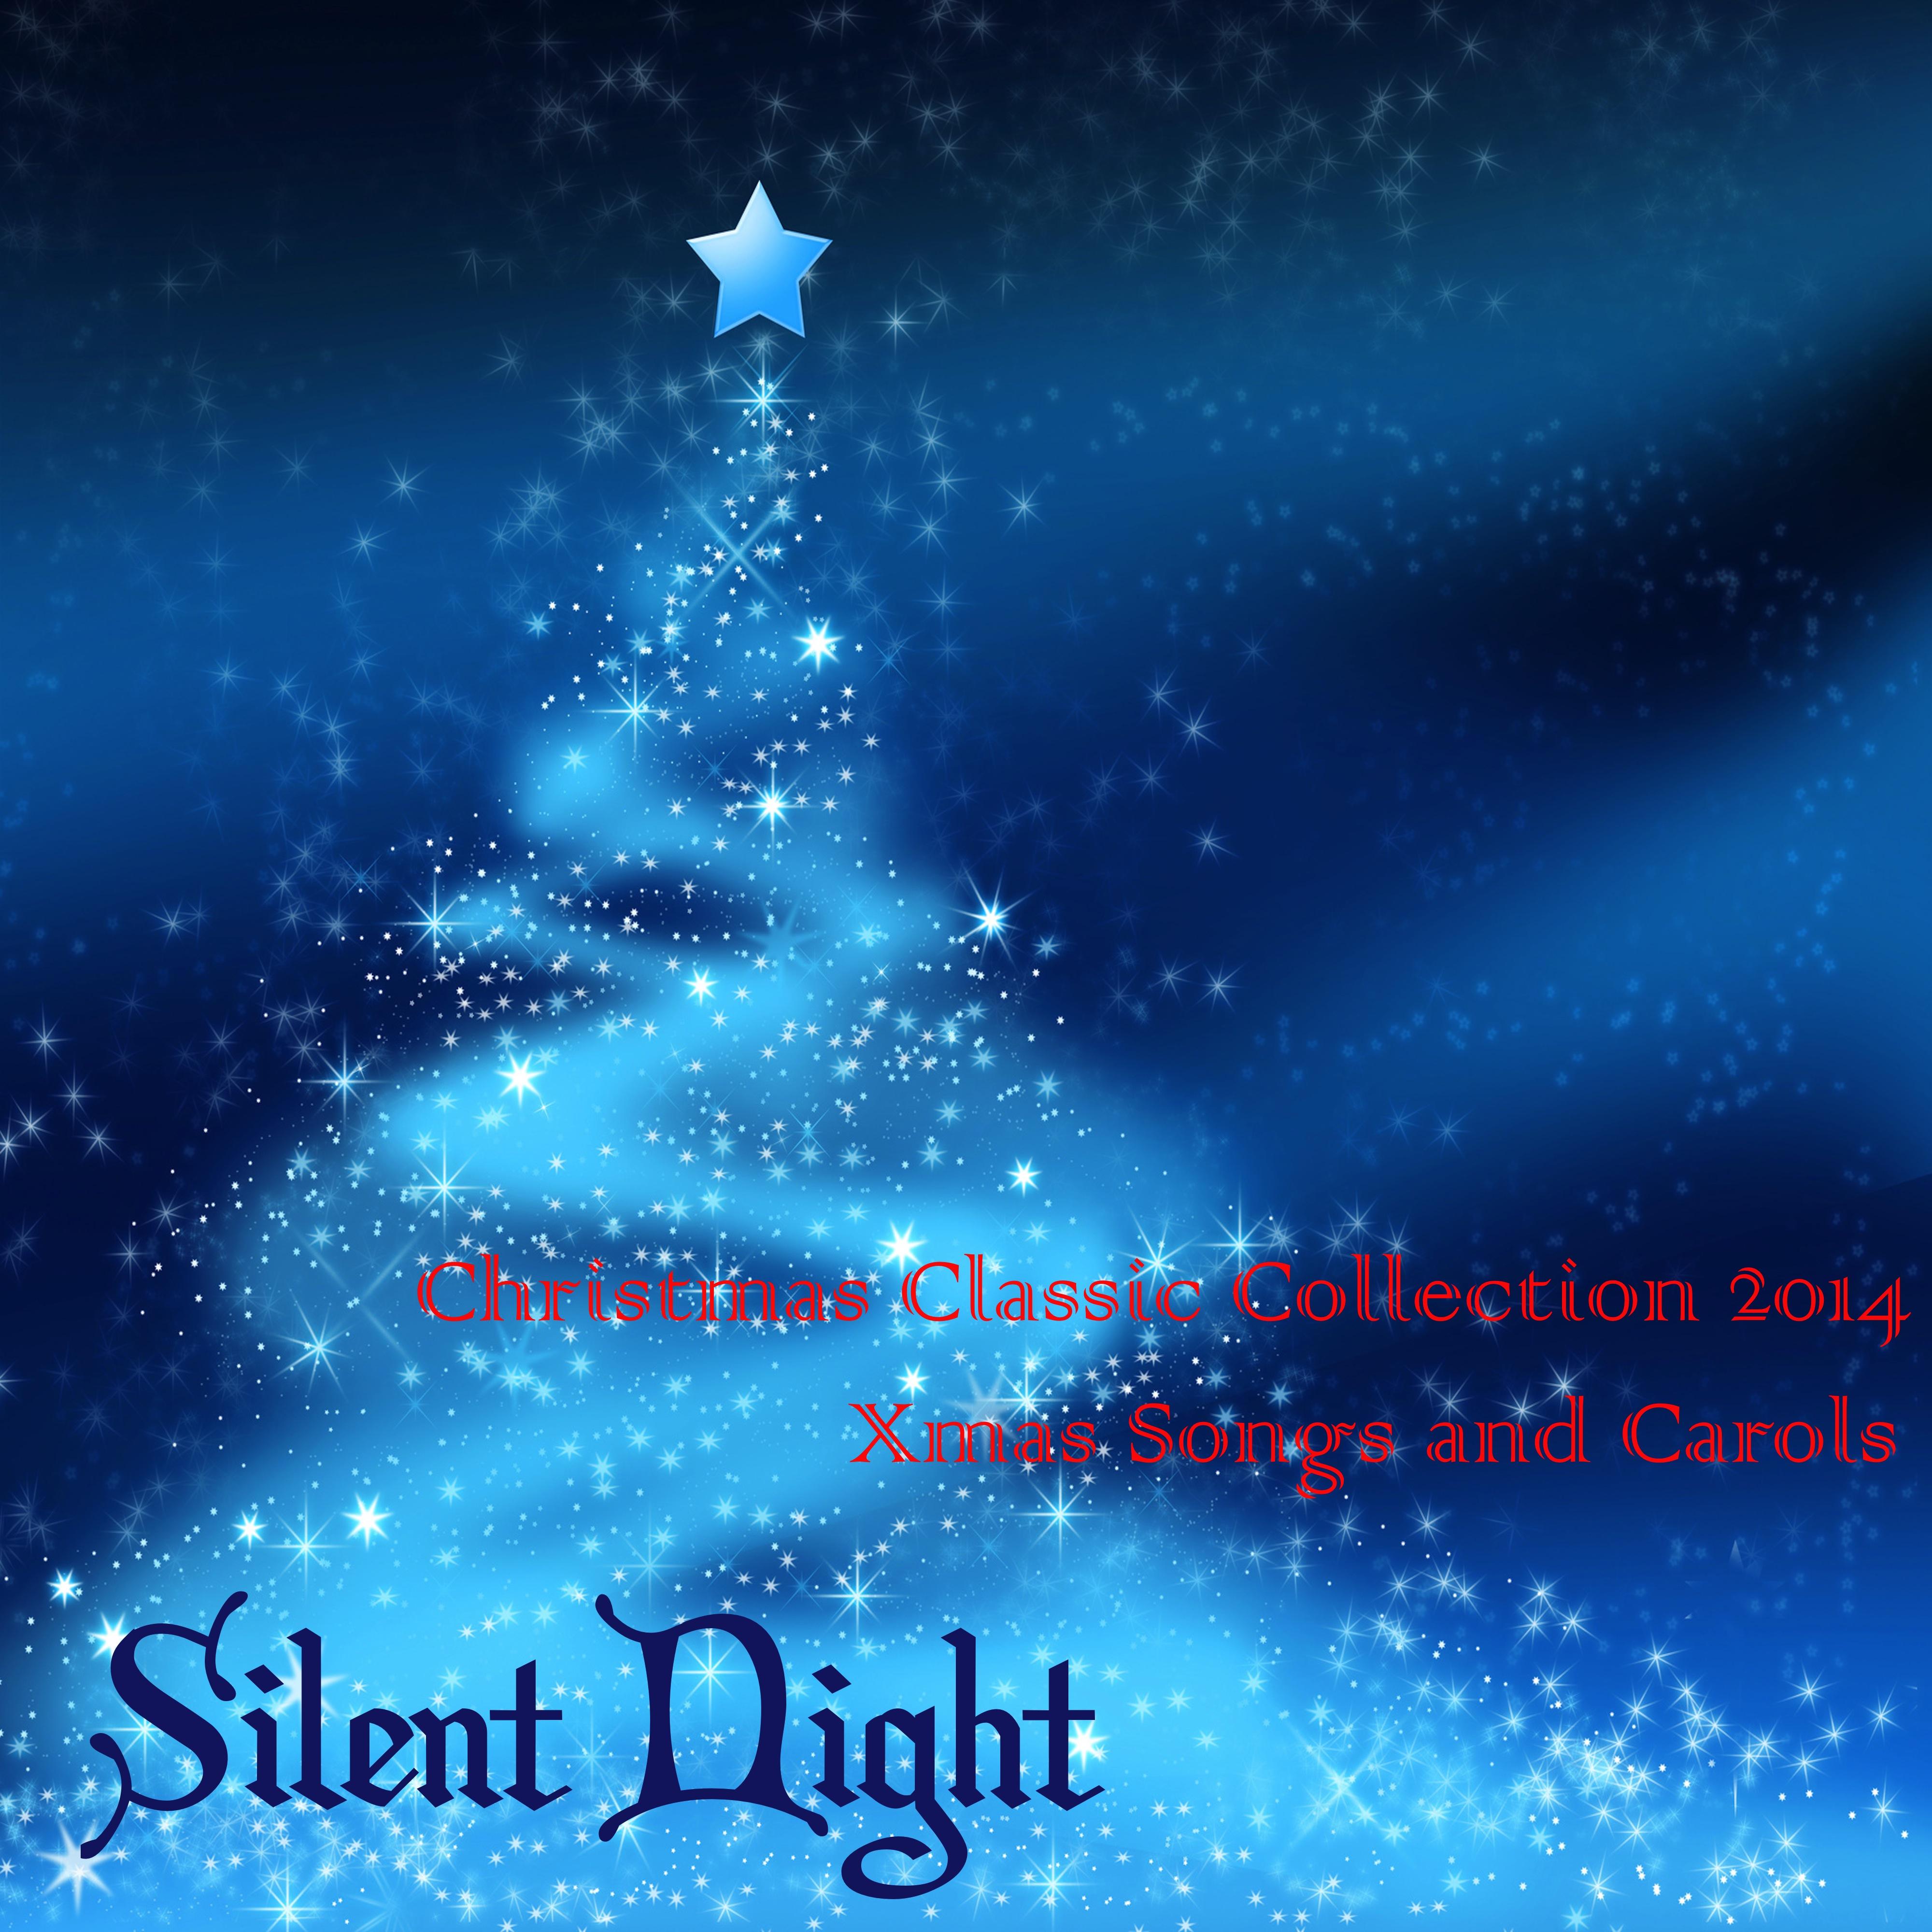 Silent Night: Christmas Classic Collection 2014 Xmas Songs and Carols